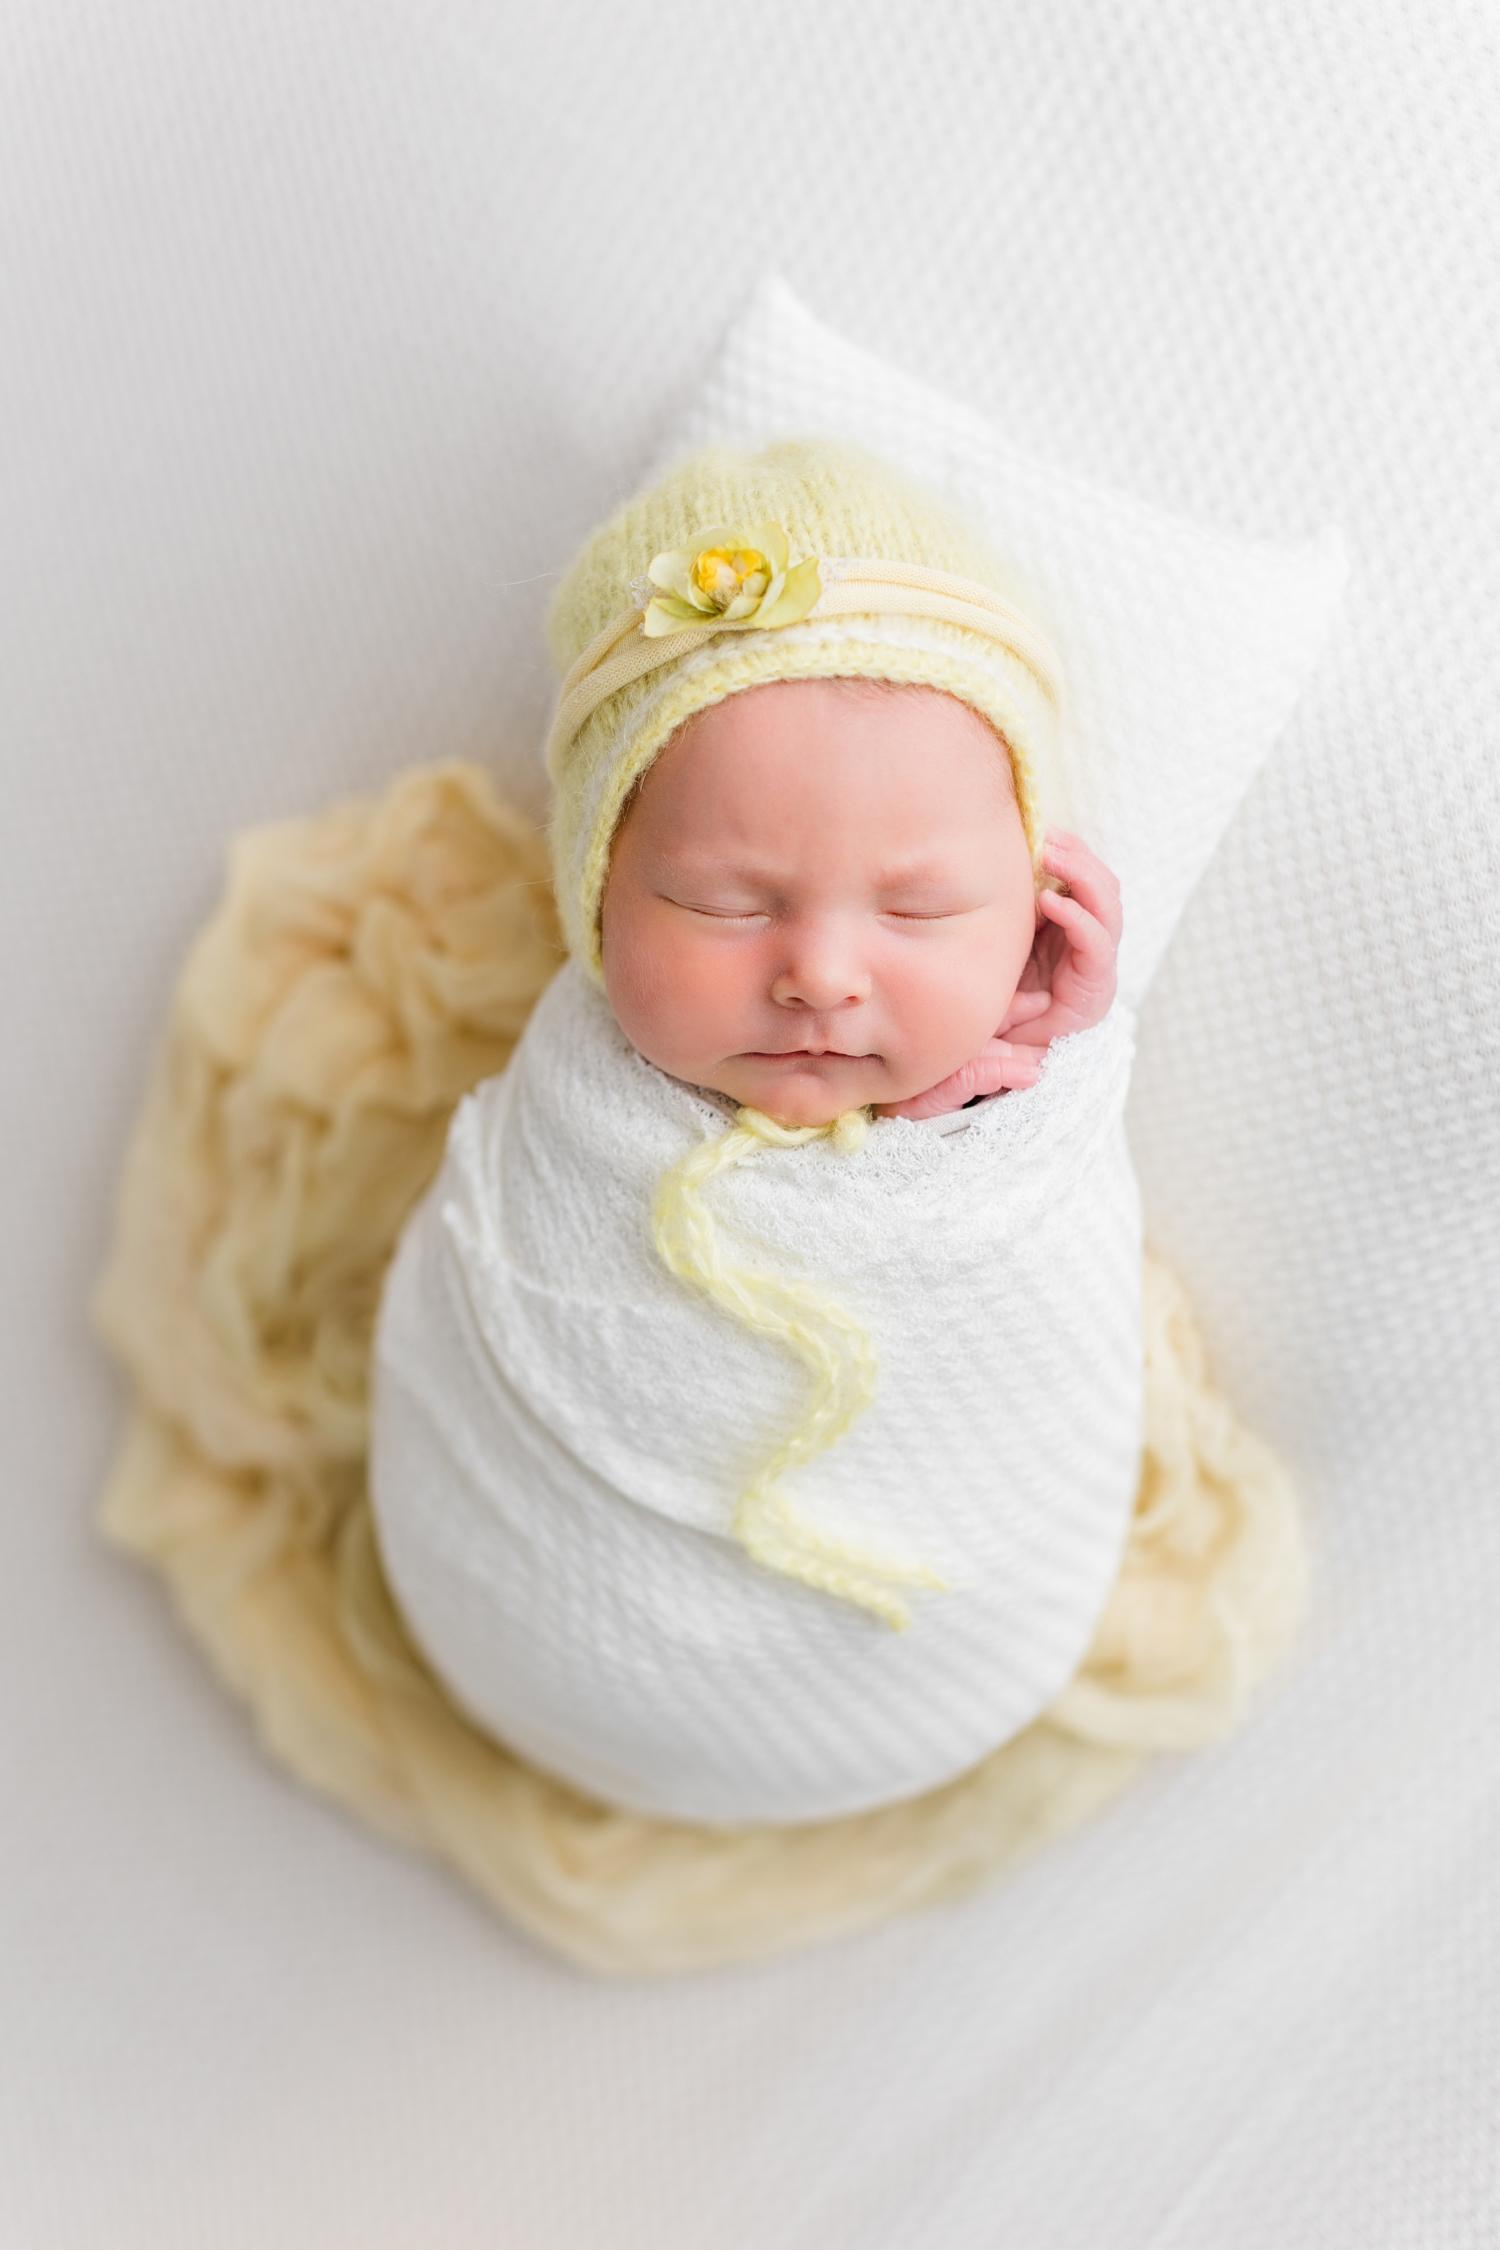 Baby Olivia wrapped in white laying on a soft yellow swaddle wearing a yellow bonnet with floral detail | CB Studio